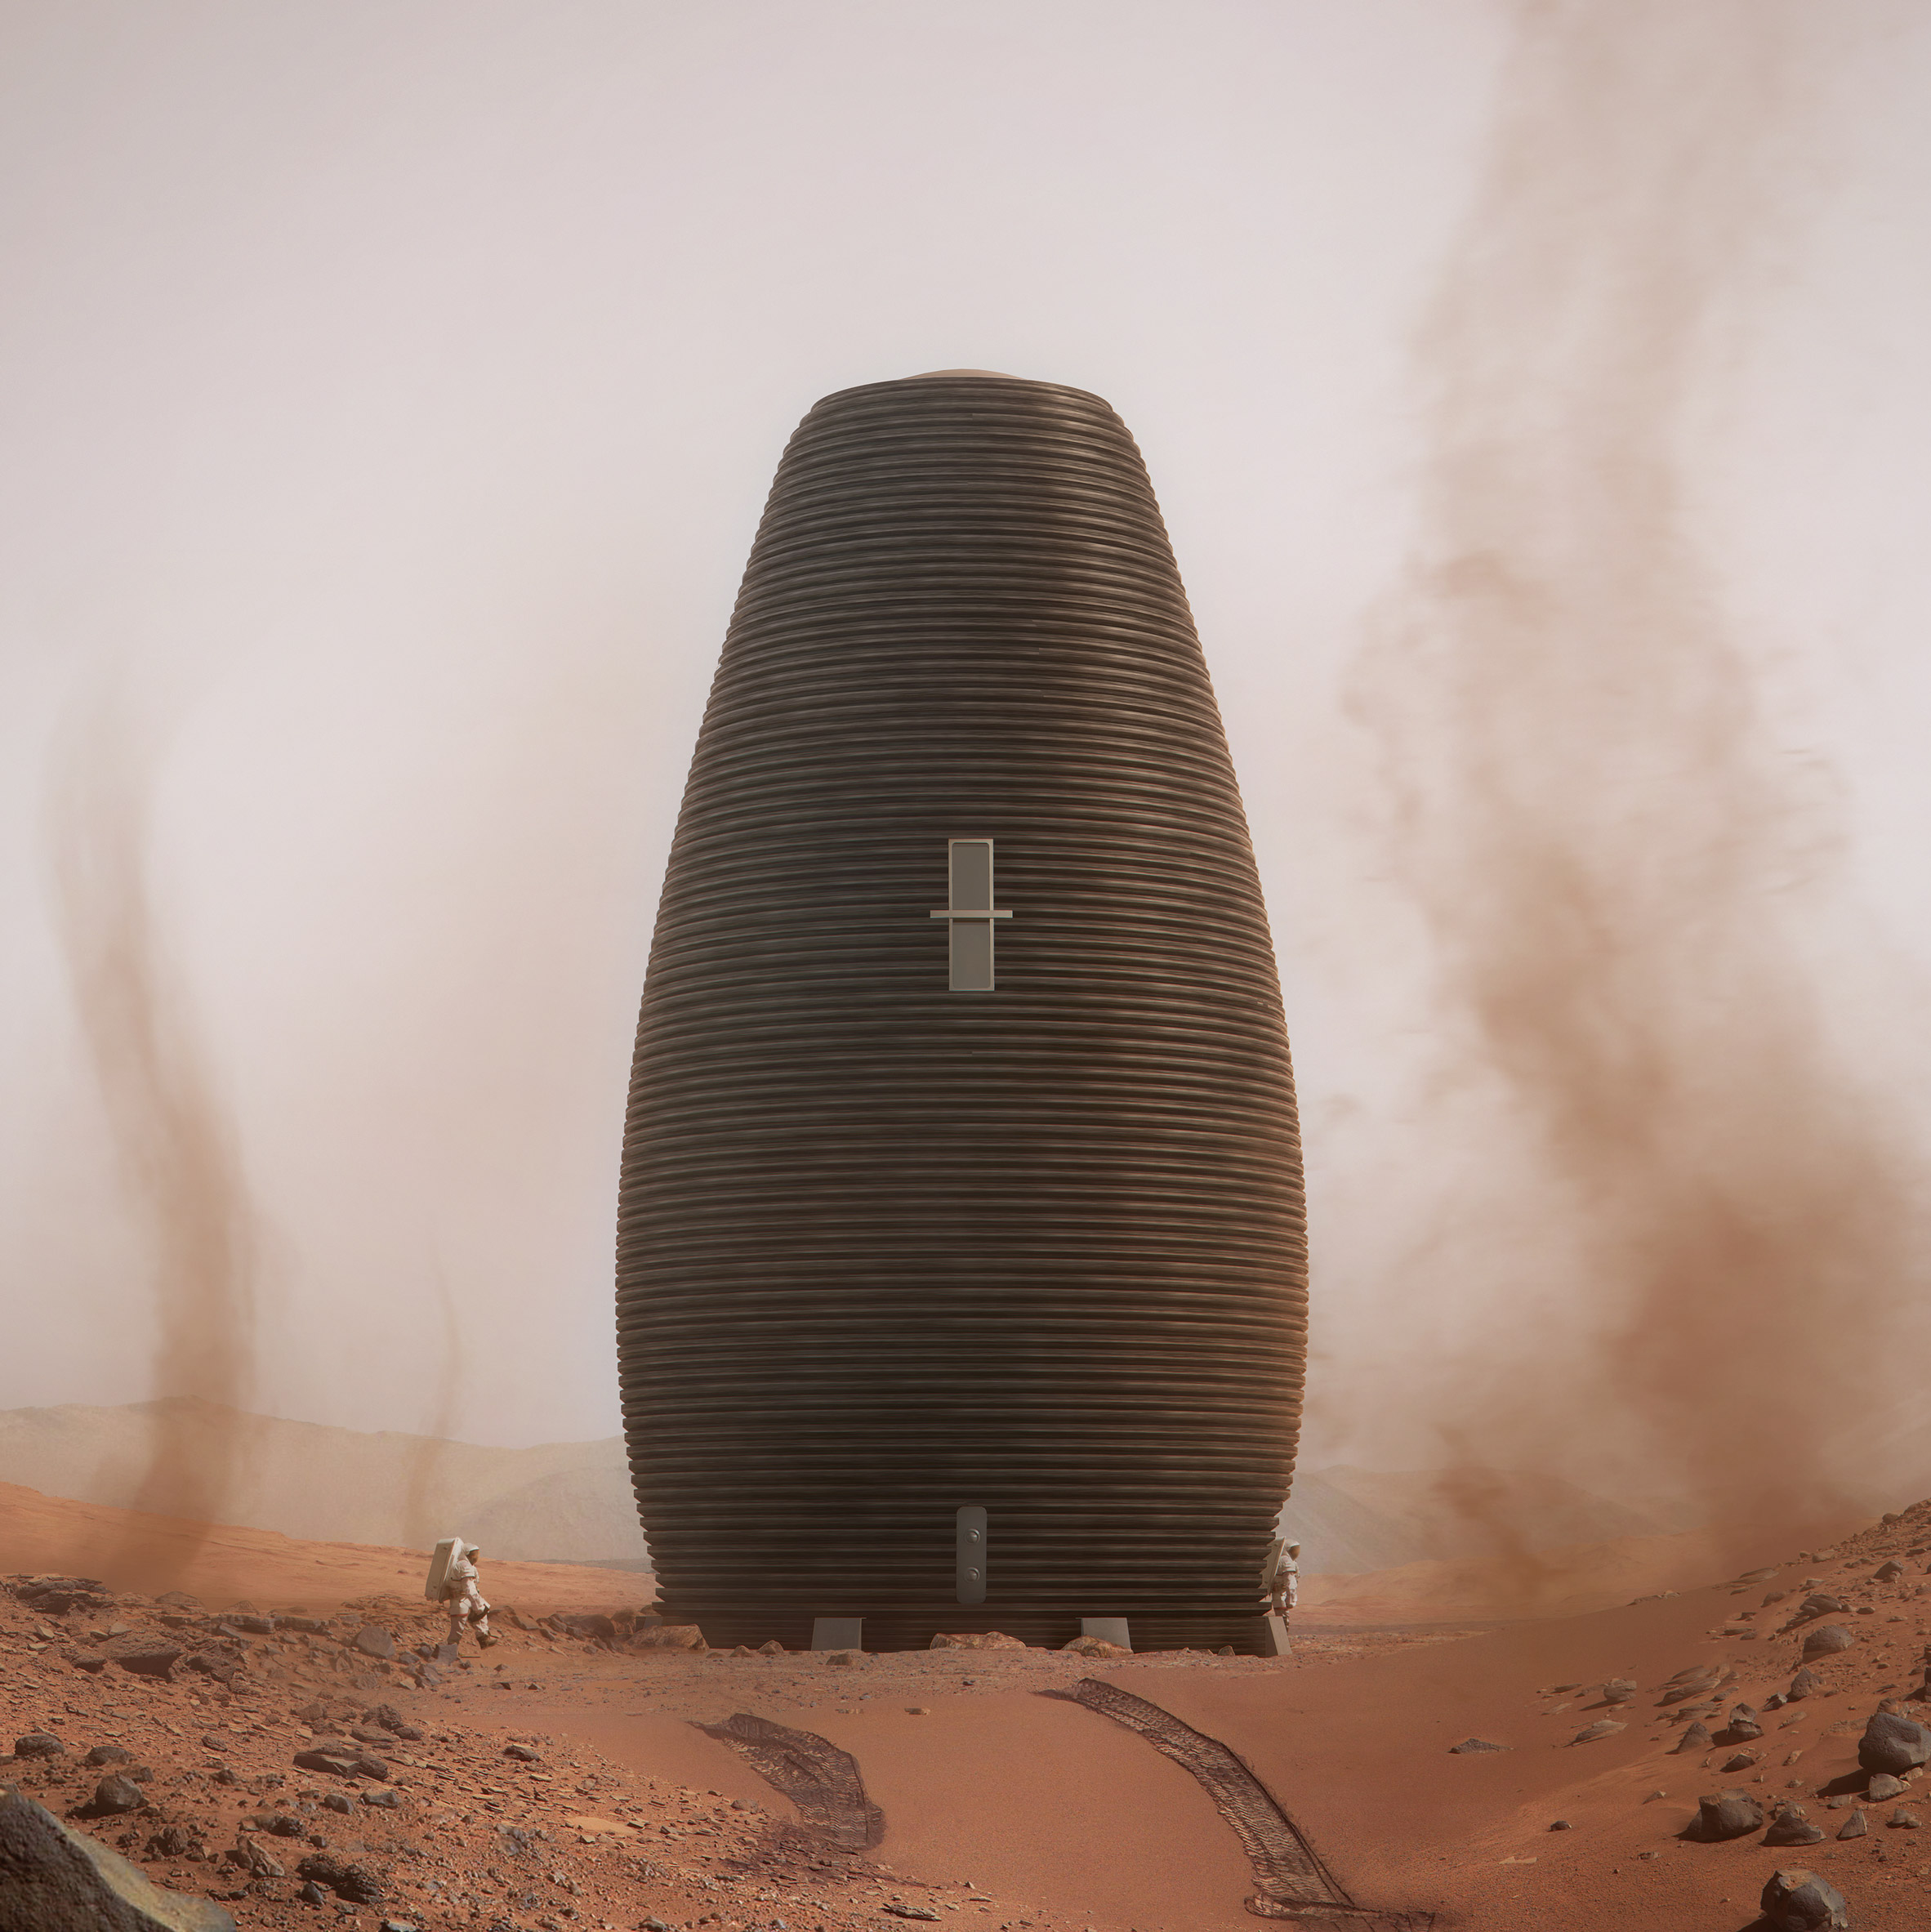 NASA announces winners of competition to design 3D-printed habitat for Mars